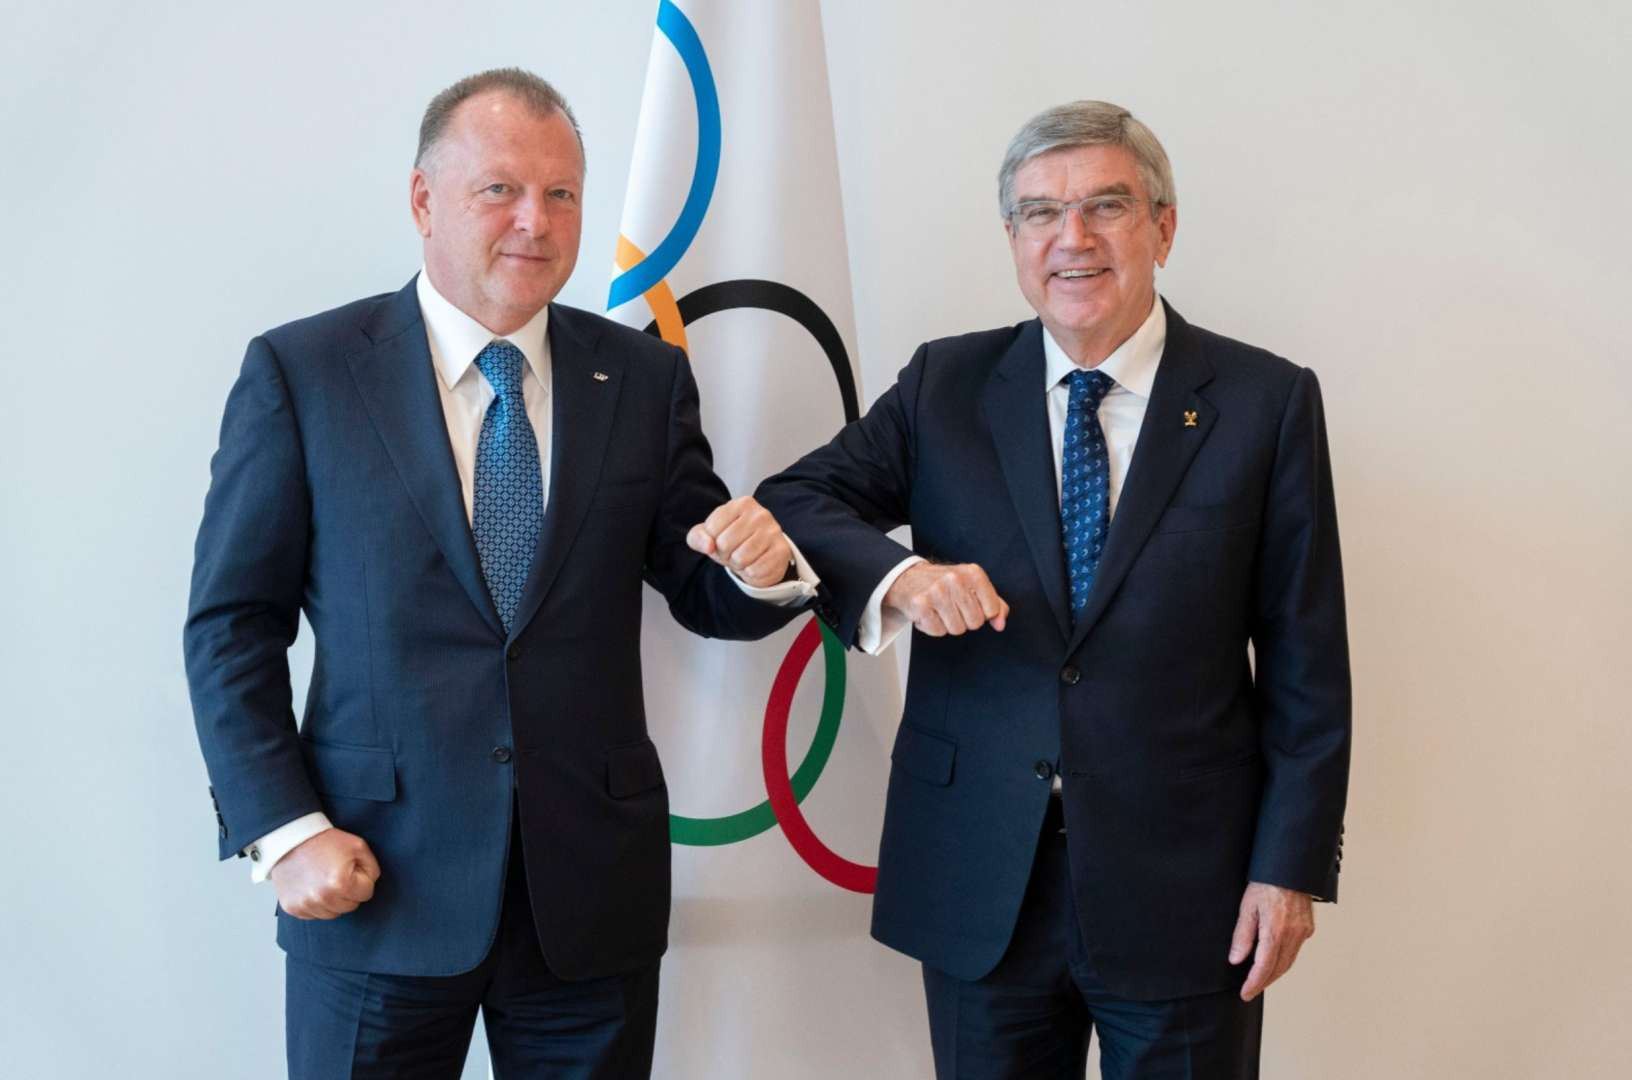 International Judo Federation President Marius Vizer, left, met with International Olympic Committee President Thomas Bach at Olympic House in Lausanne ©IJF 